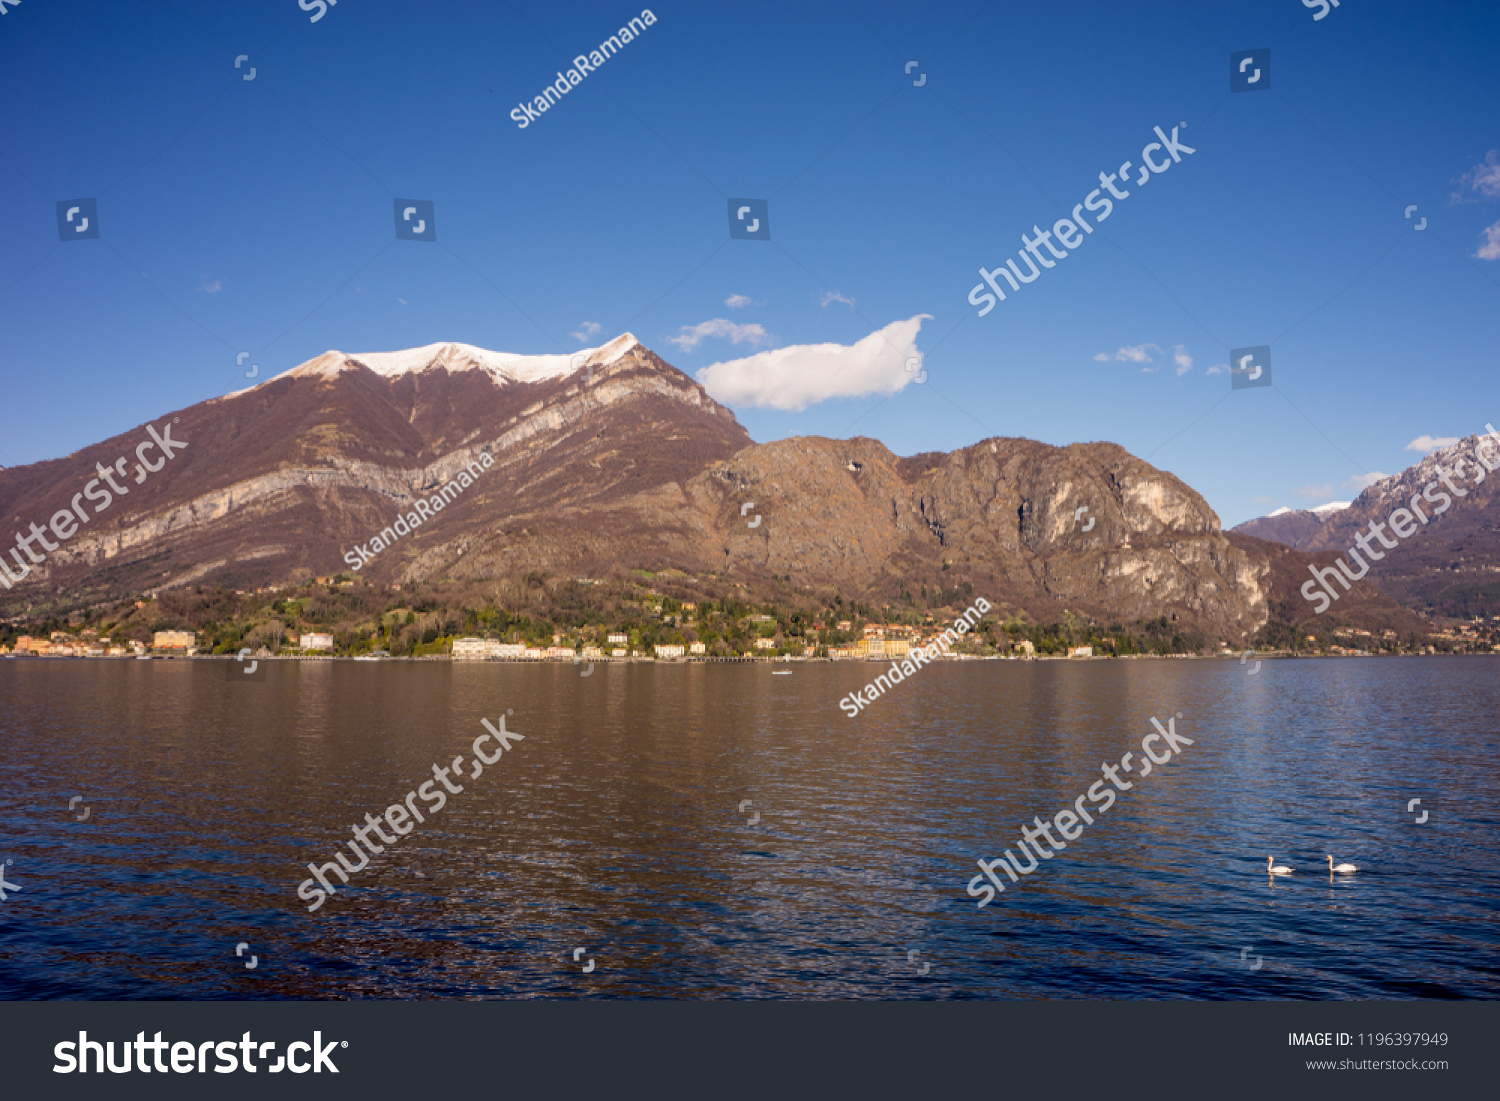 Italy, Bellagio, Lake Como, SCENIC VIEW OF SNOWCAPPED MOUNTAINS AGAINST BLUE SKY with swans on lake #1196397949